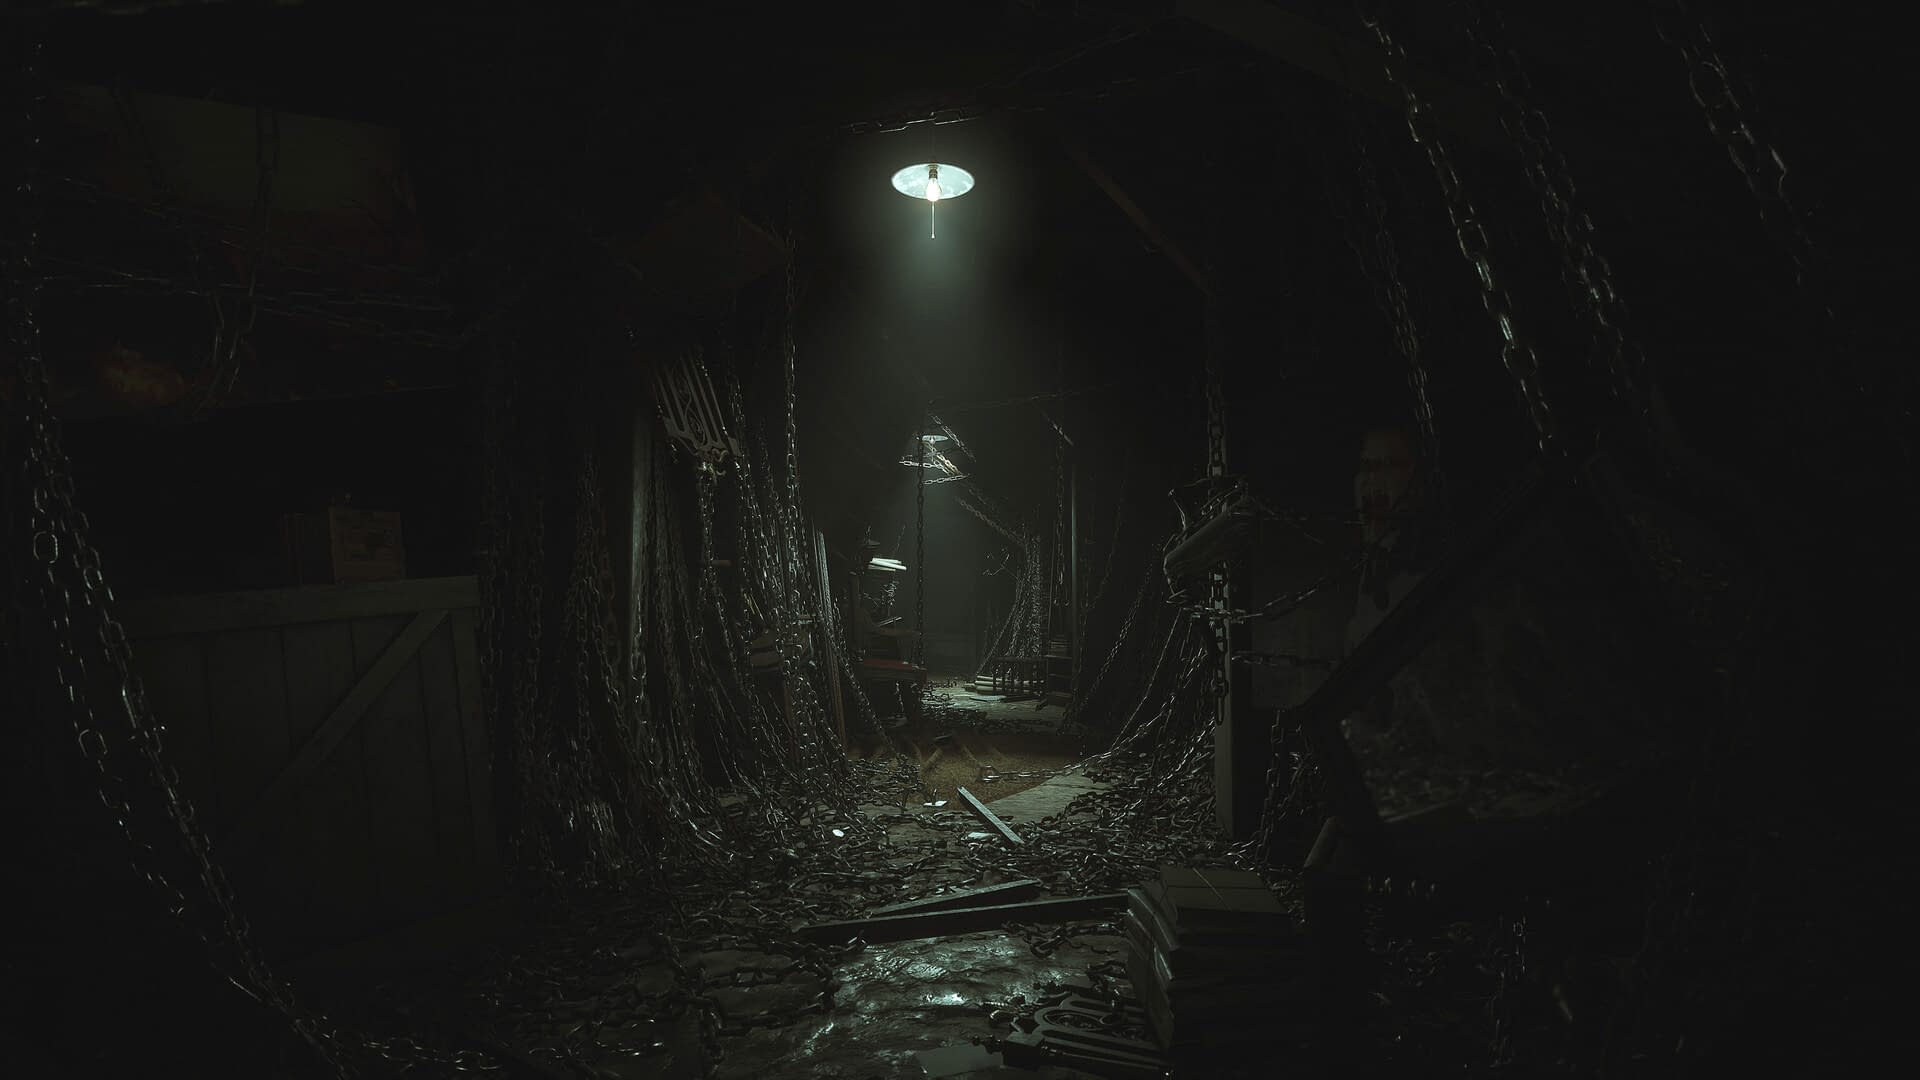 Layers of Fear’s PC system requirements developed with UE5 are announced